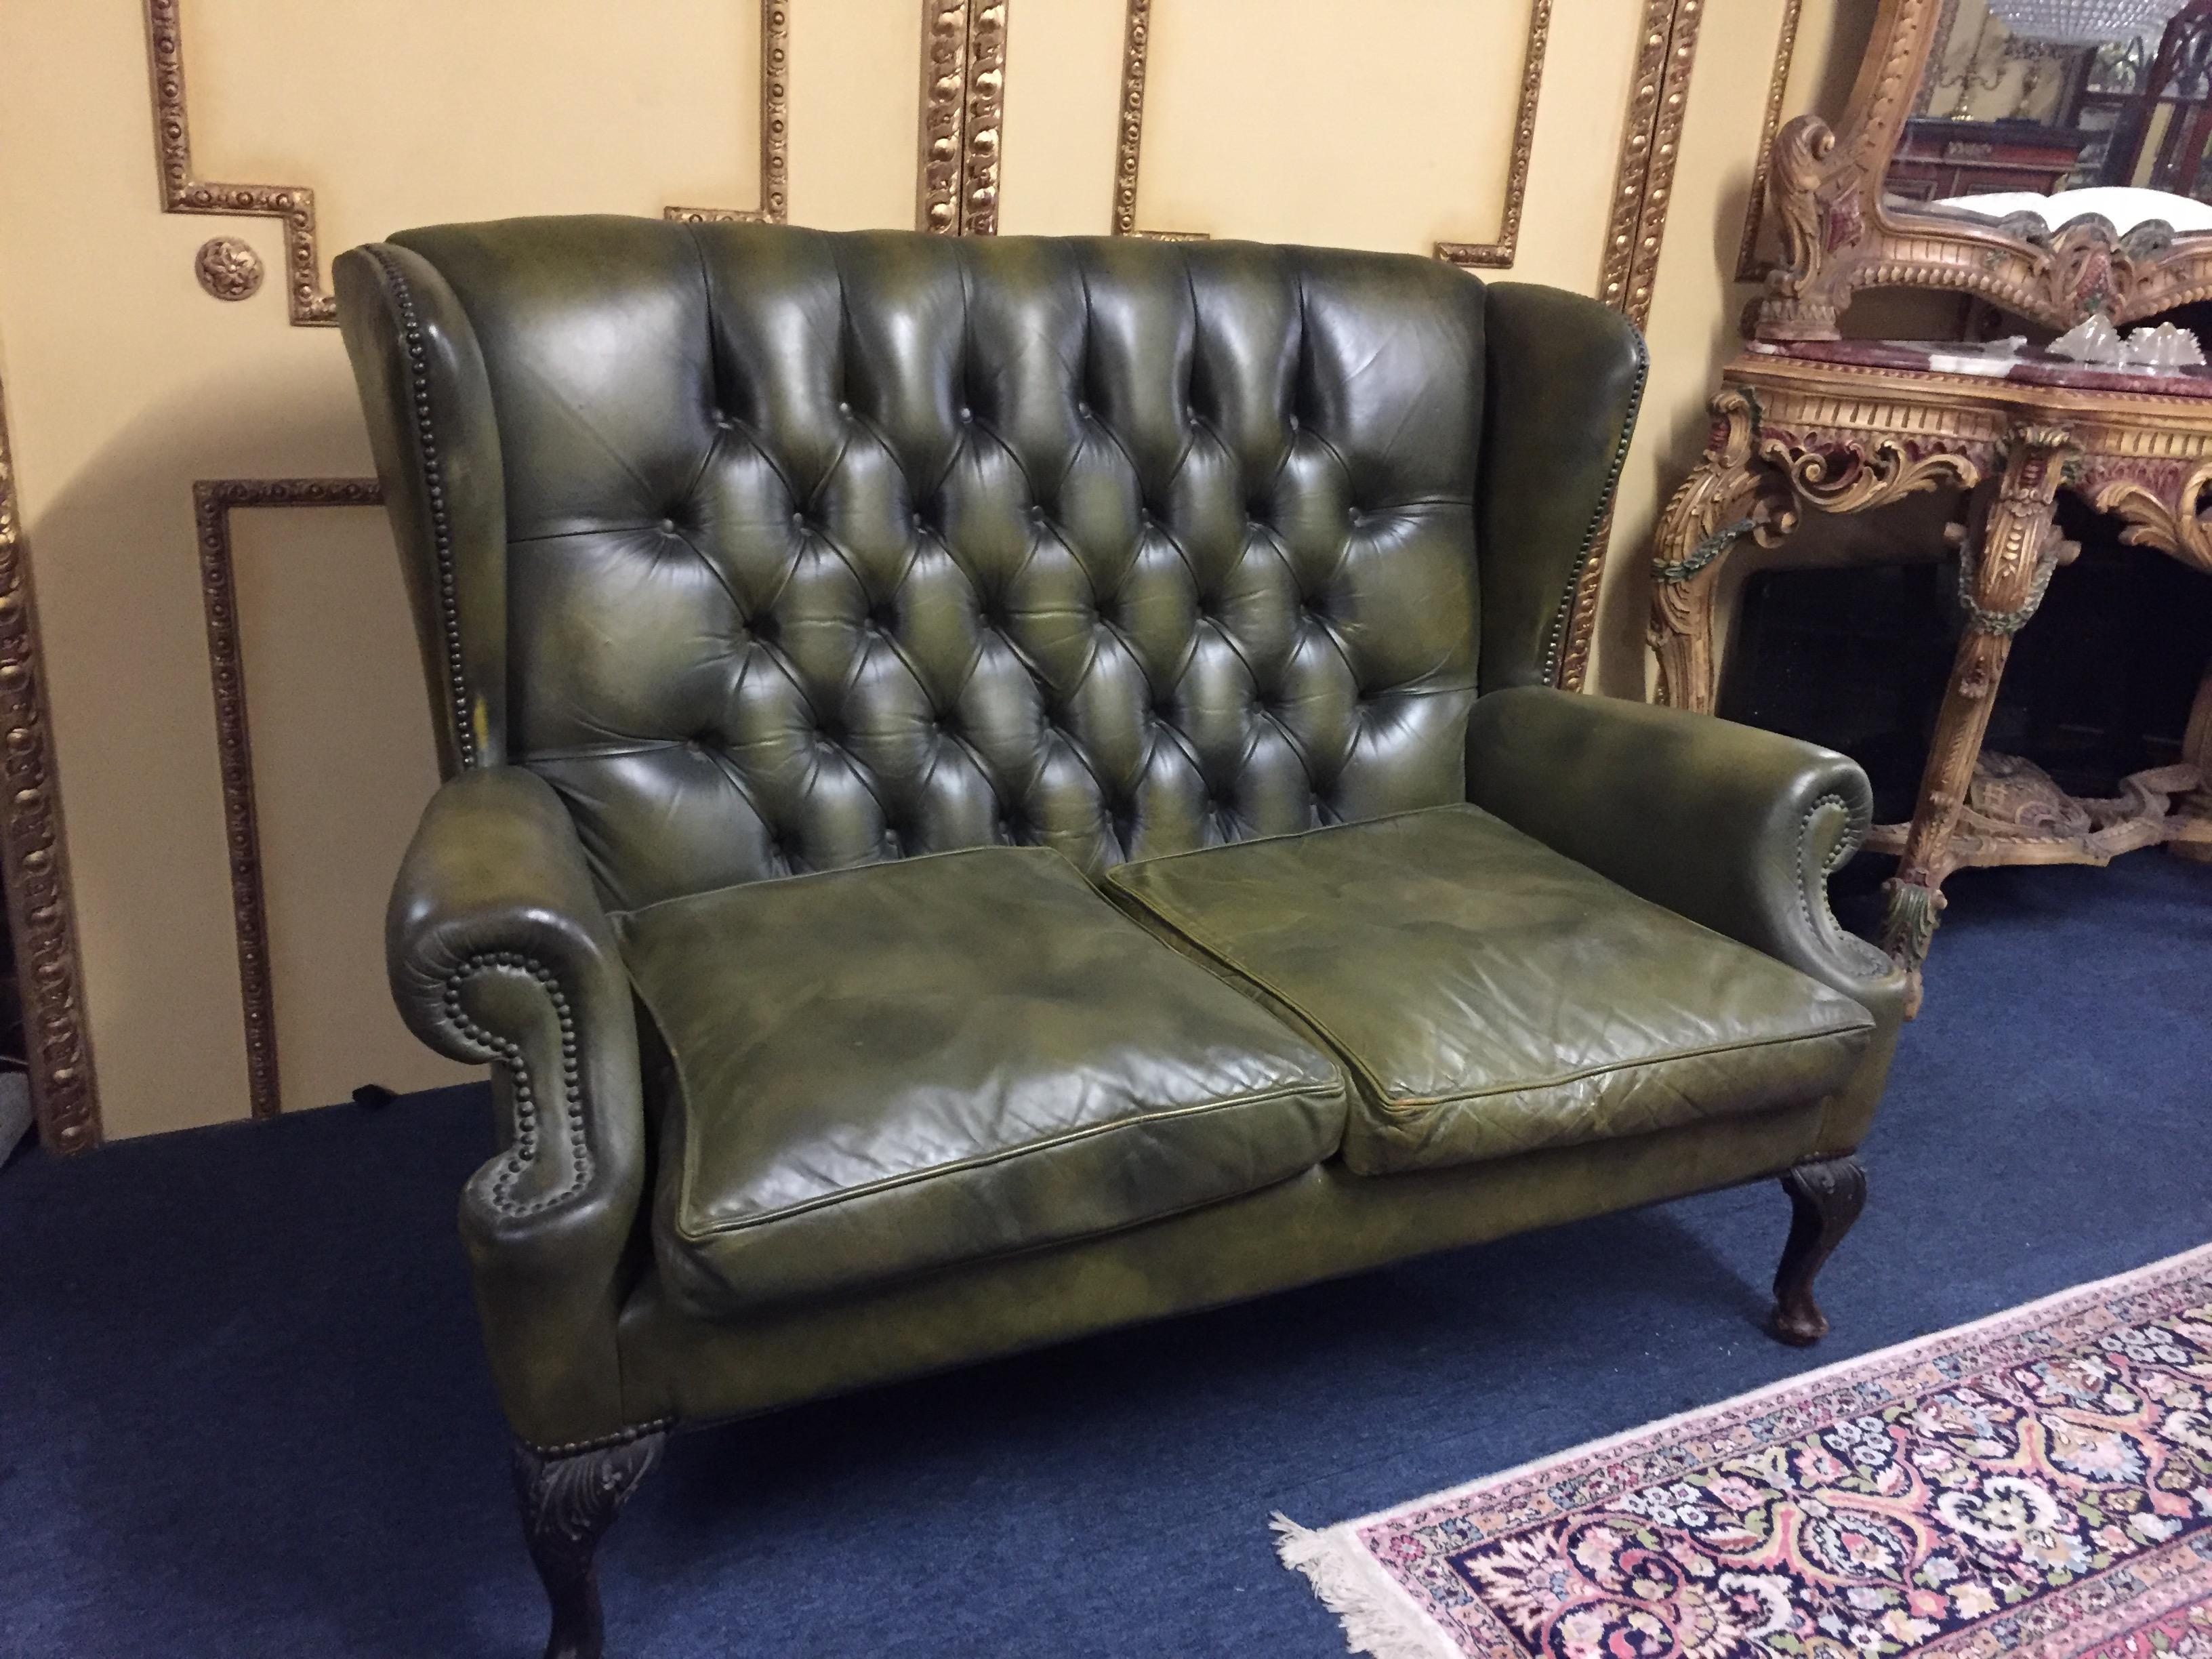 Original Chesterfield sofa Quenn Ann
2 seater sofa
genuine leather
Green - green

Good condition
Only one pillow has a minimal hole.


Ideal for the beautiful ambience
at home or for office, business, club ....
nice for summer to relax in